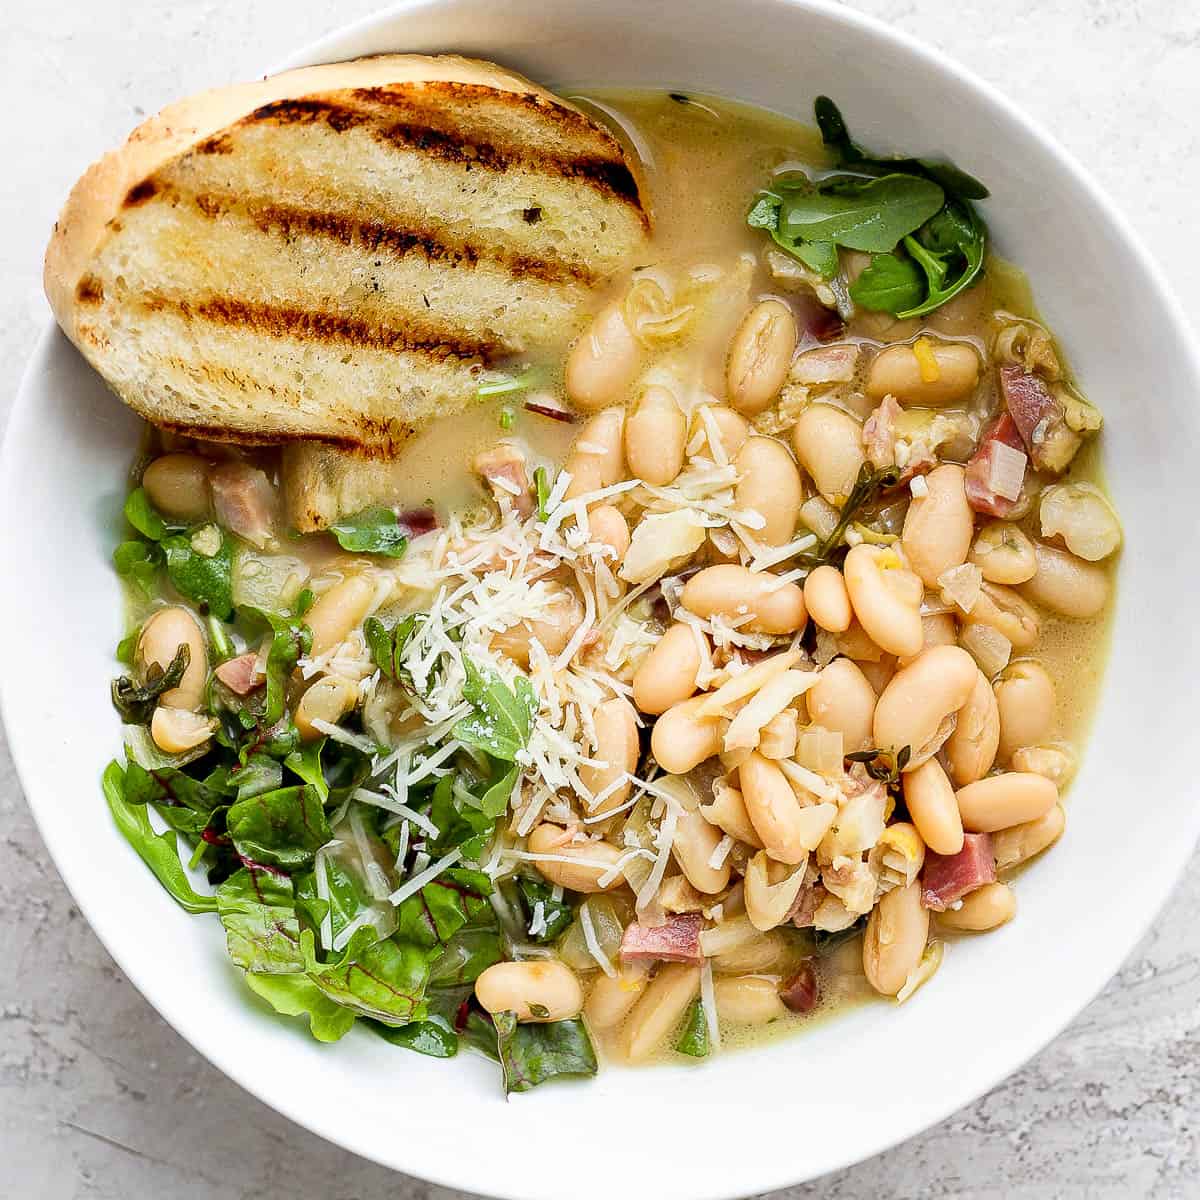 Bowl of brothy beans with grilled bread.